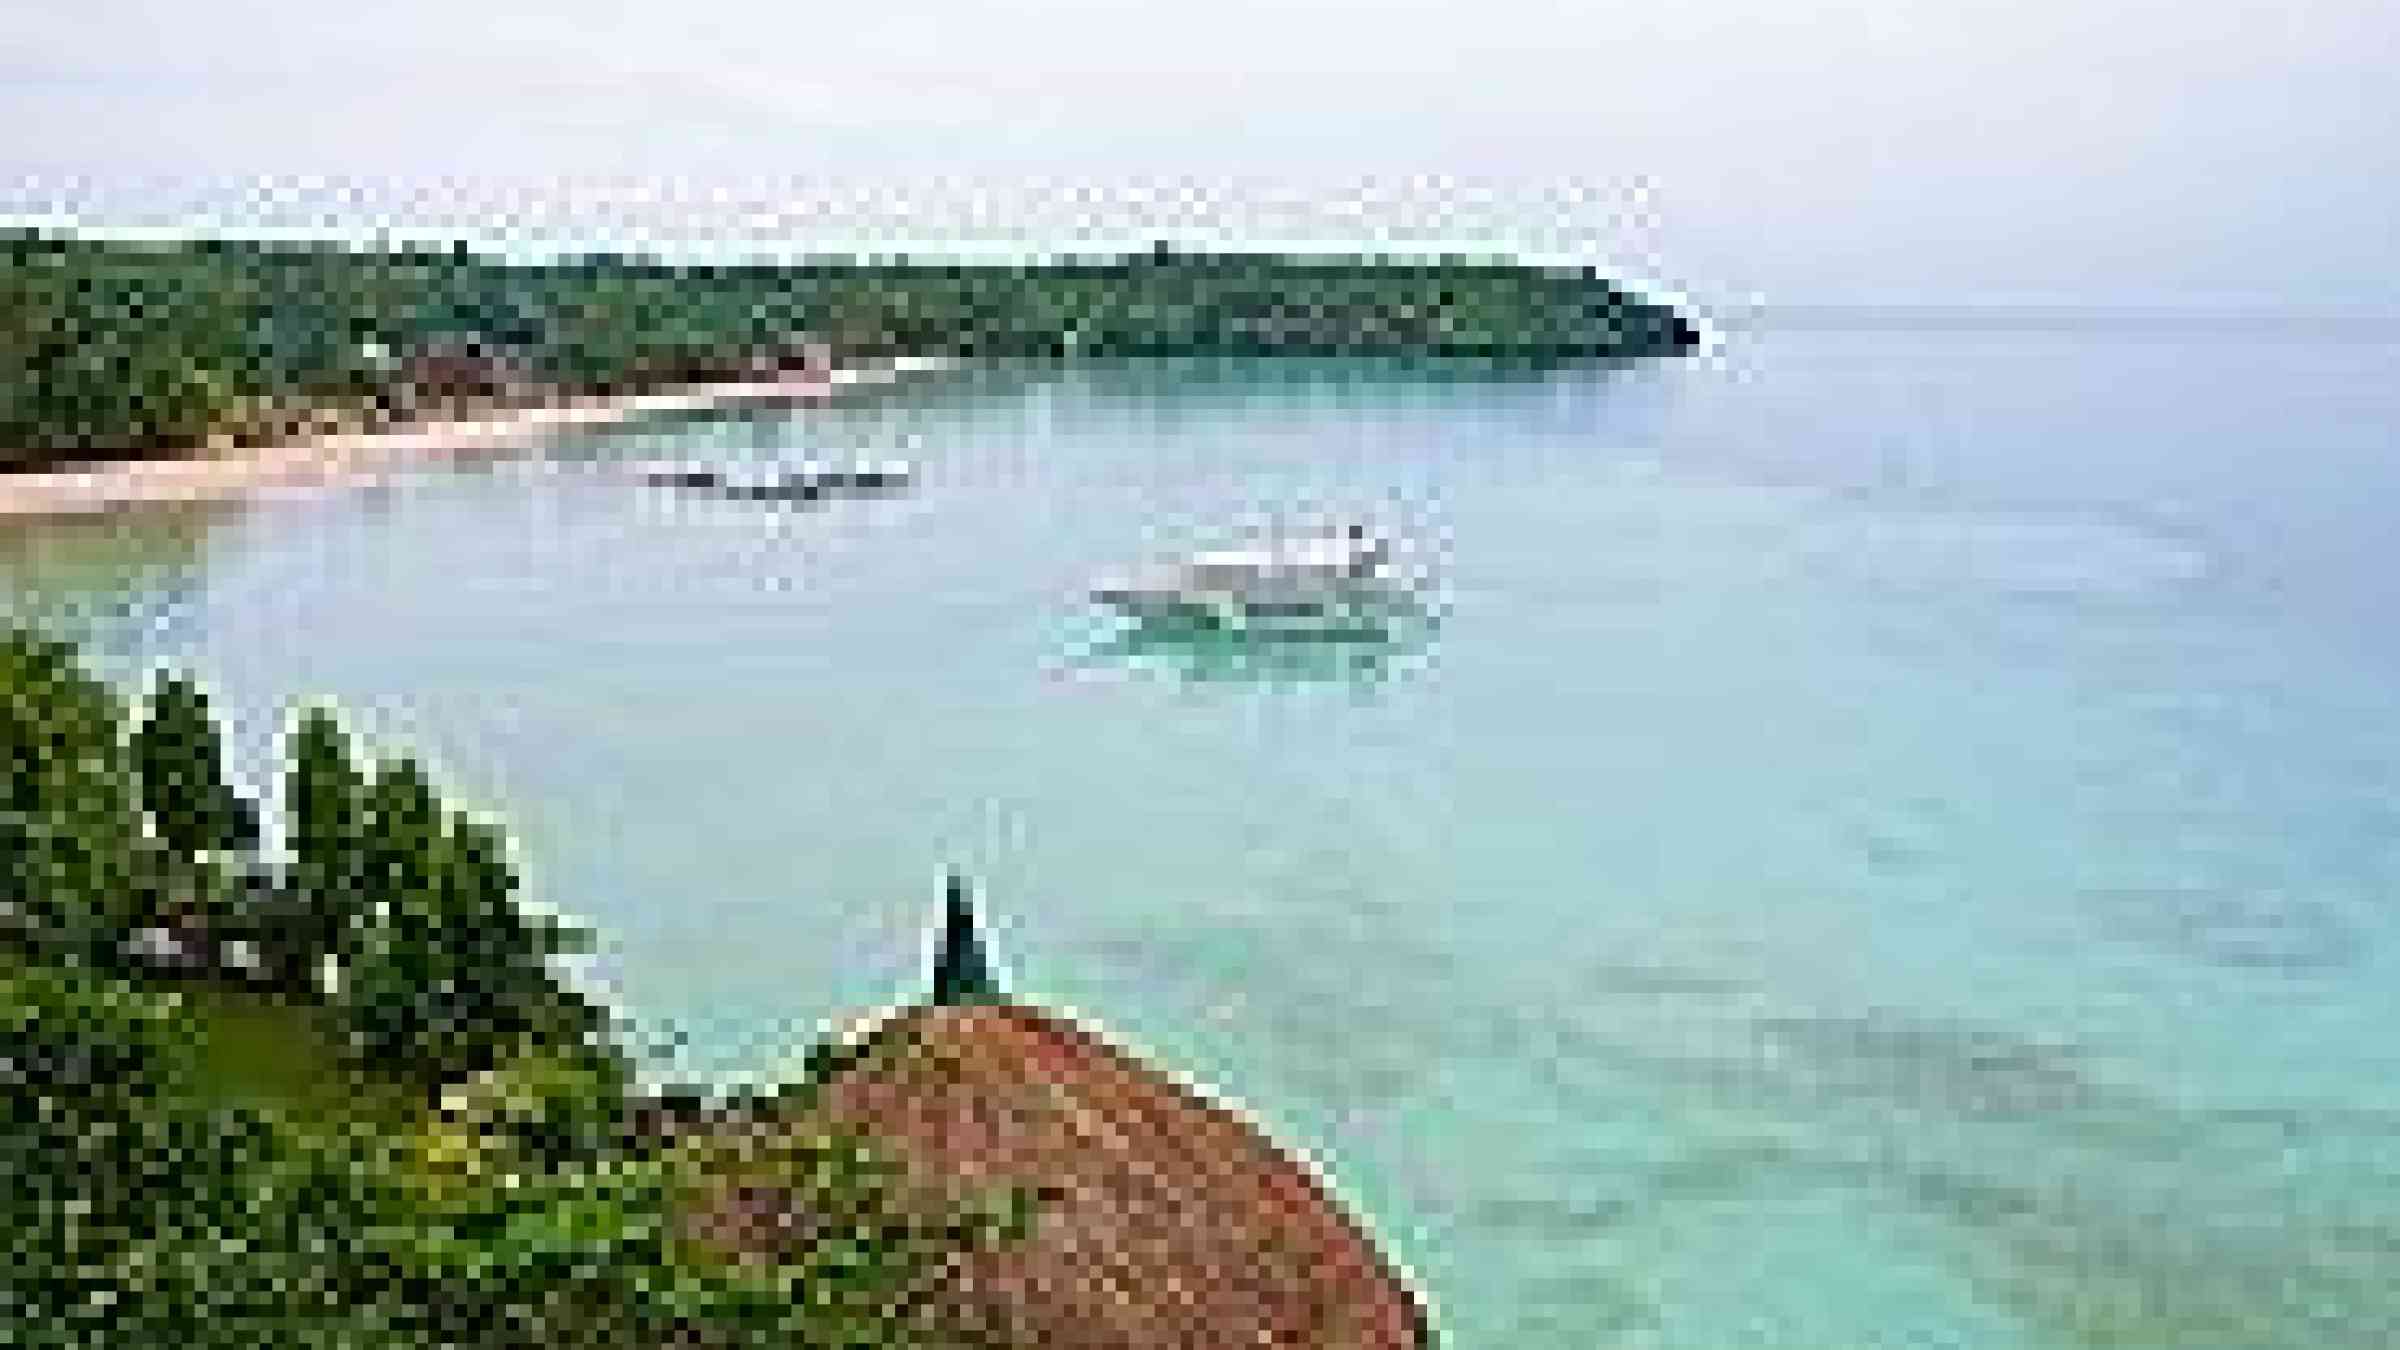 Photo of the Camotes Islands by Flickr user Roro Fernandez, Creative Commons Attribution-NonCommercial-ShareAlike 2.0 Generic (CC BY-NC-SA 2.0) http://www.flickr.com/photos/rorofernandez/3262413068/